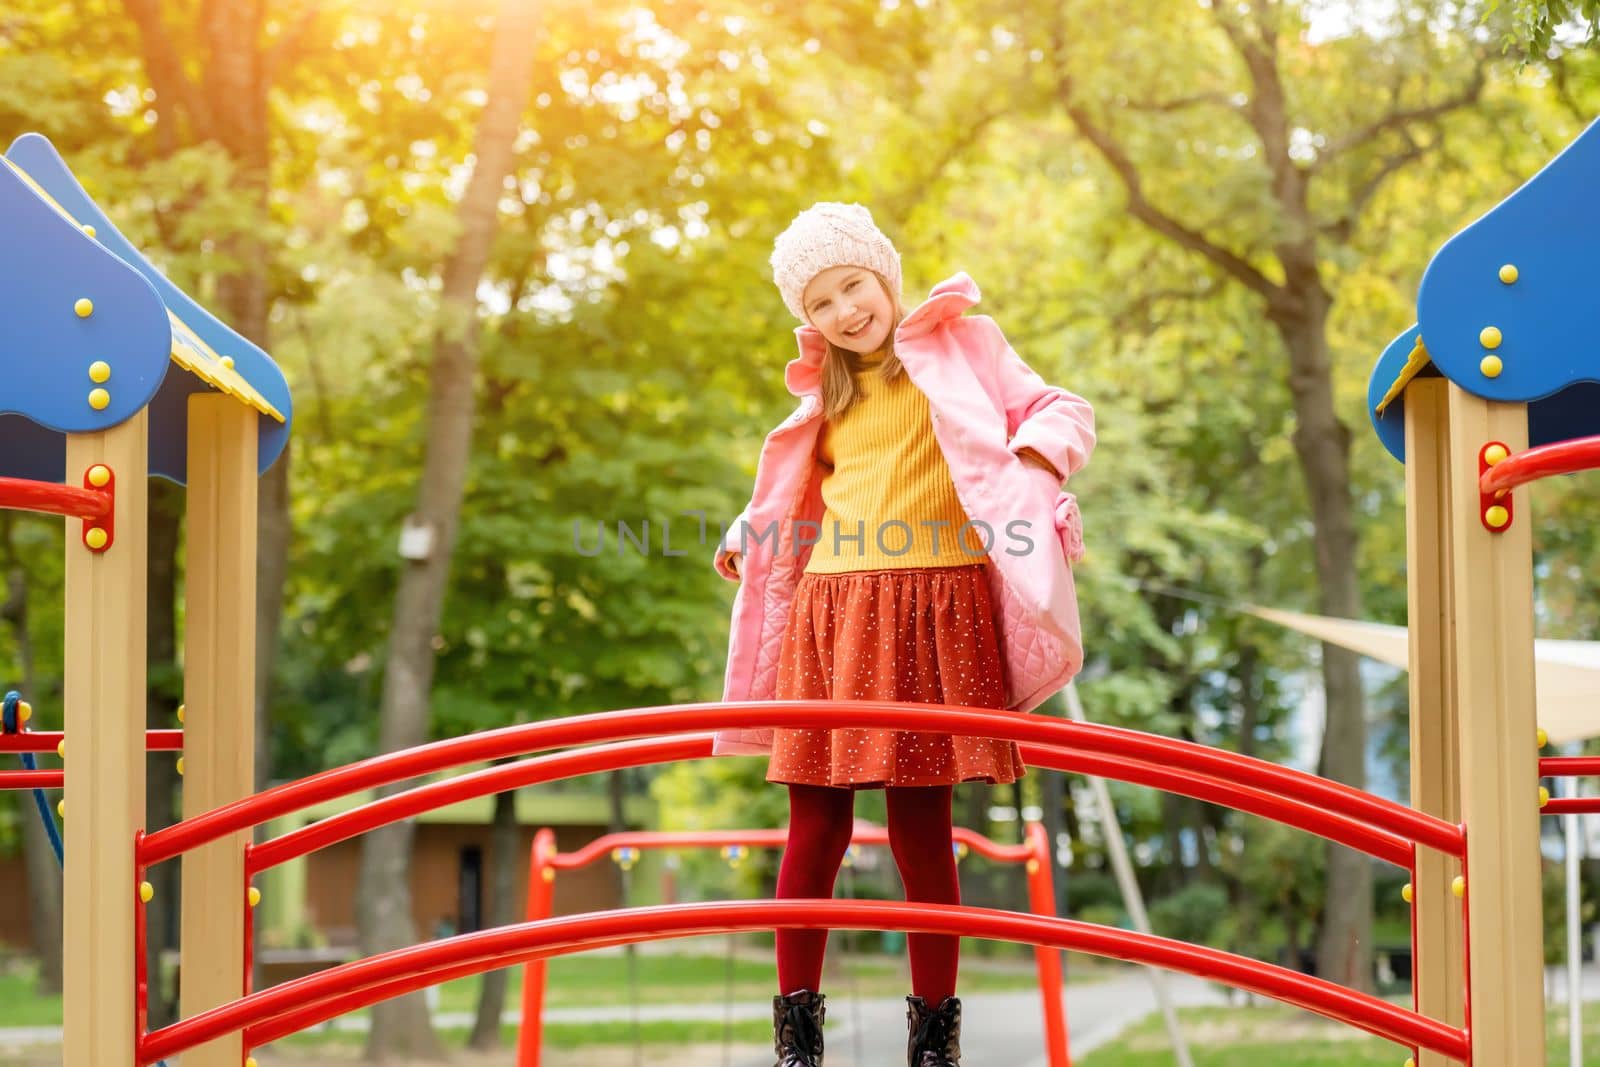 Pretty girl kid standing on playground at autumn day outdoors and smiling. Female child happy street portrait